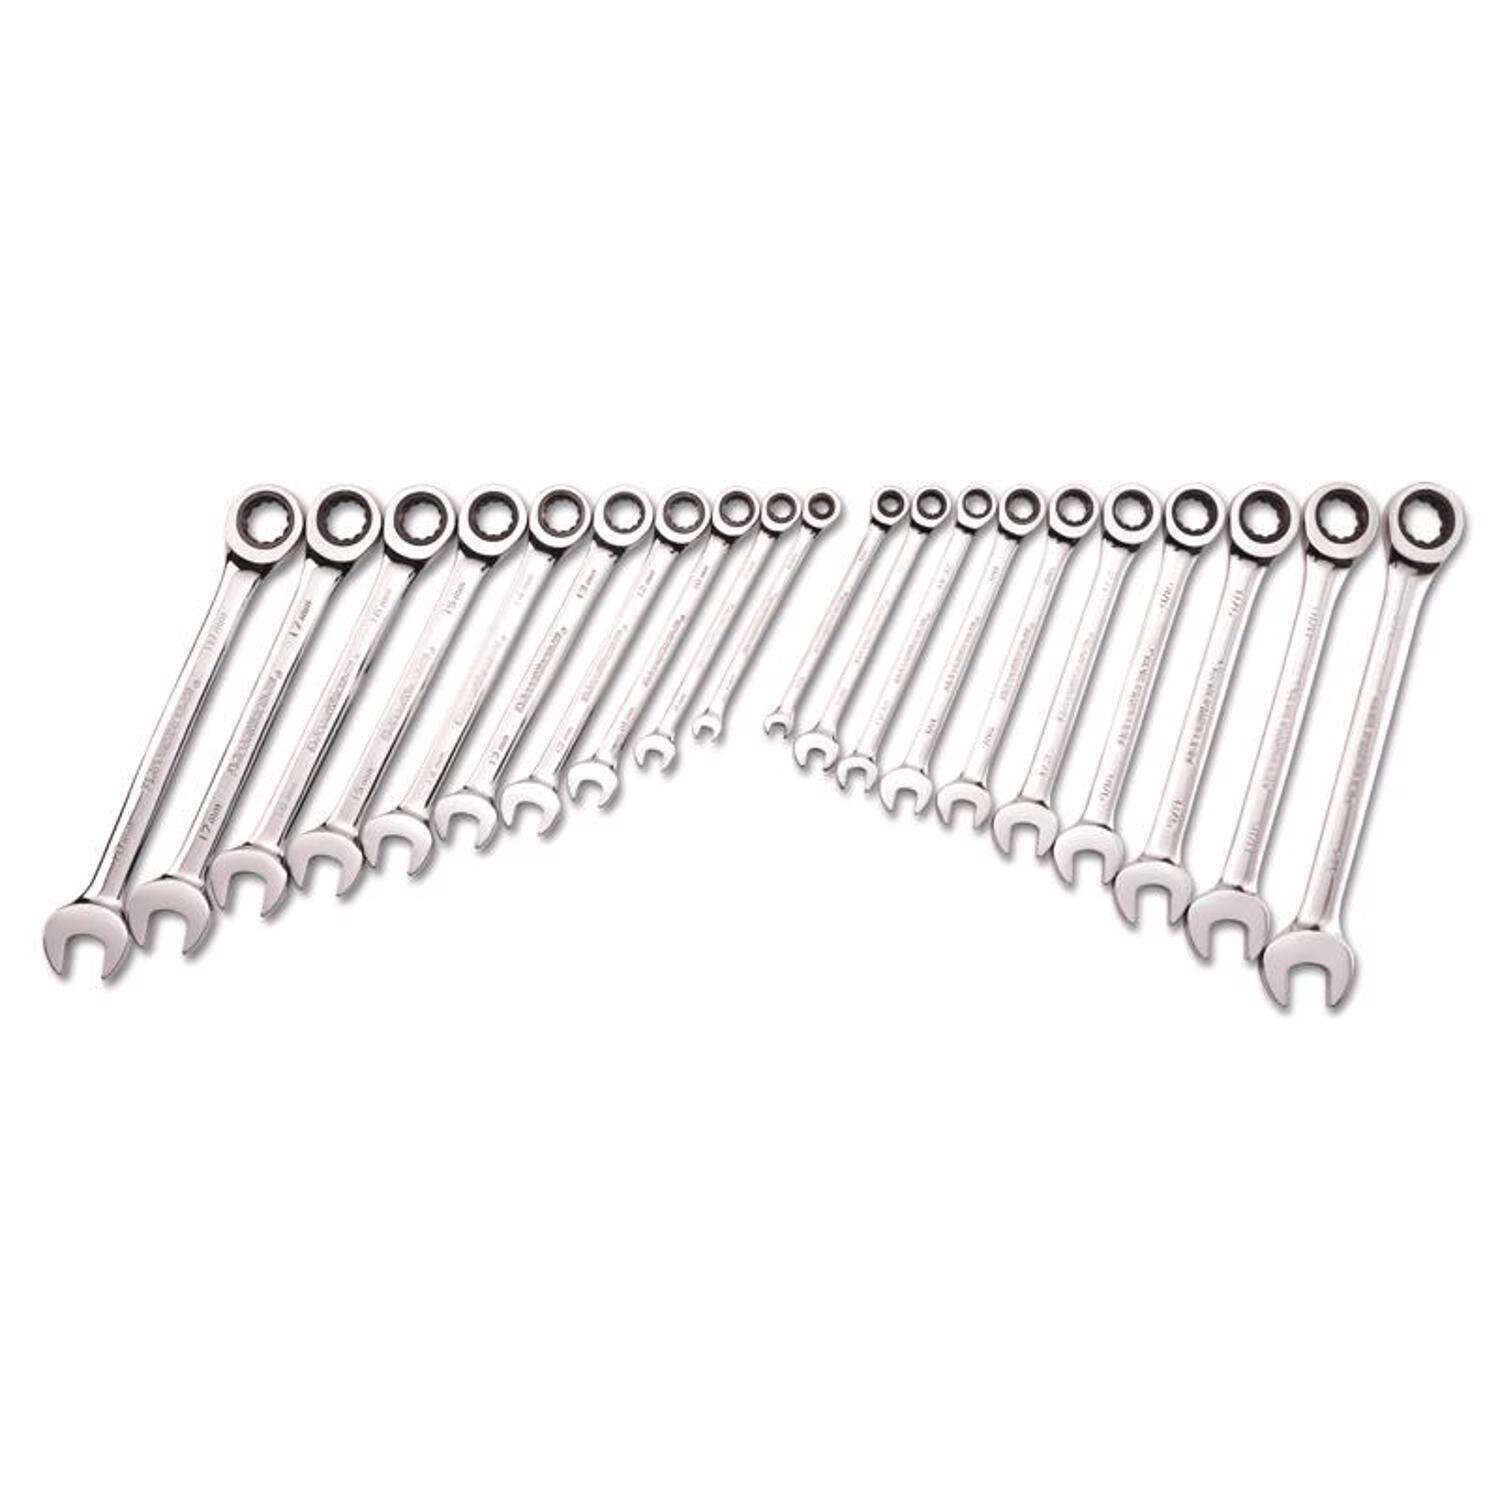 GearWrench 20 pc Metric & SAE Ratcheting Combination Wrench Set $60